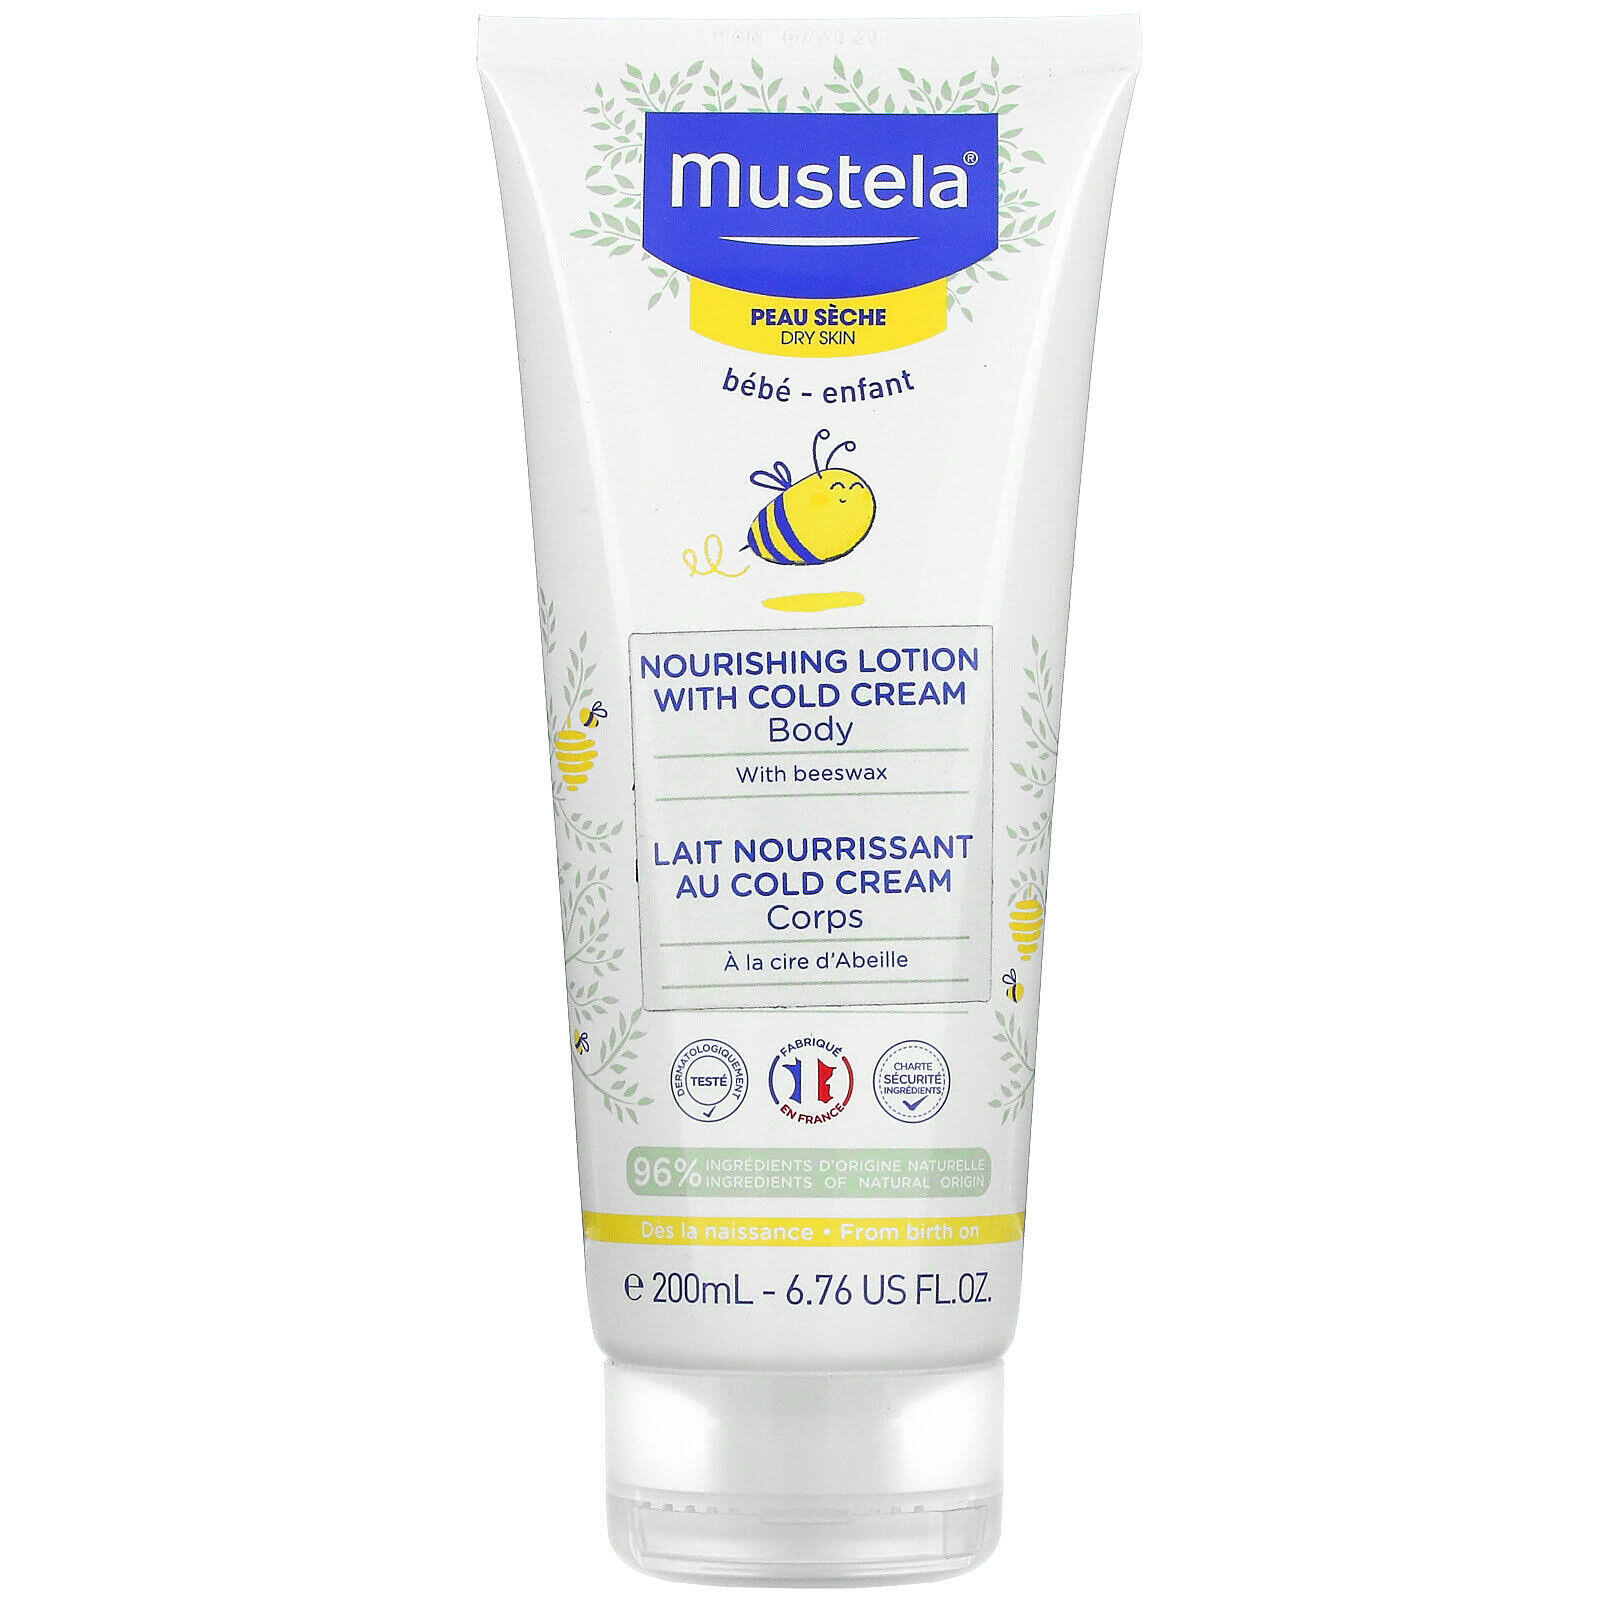 Mustela - Nourishing Lotion with Cold Cream 200ml